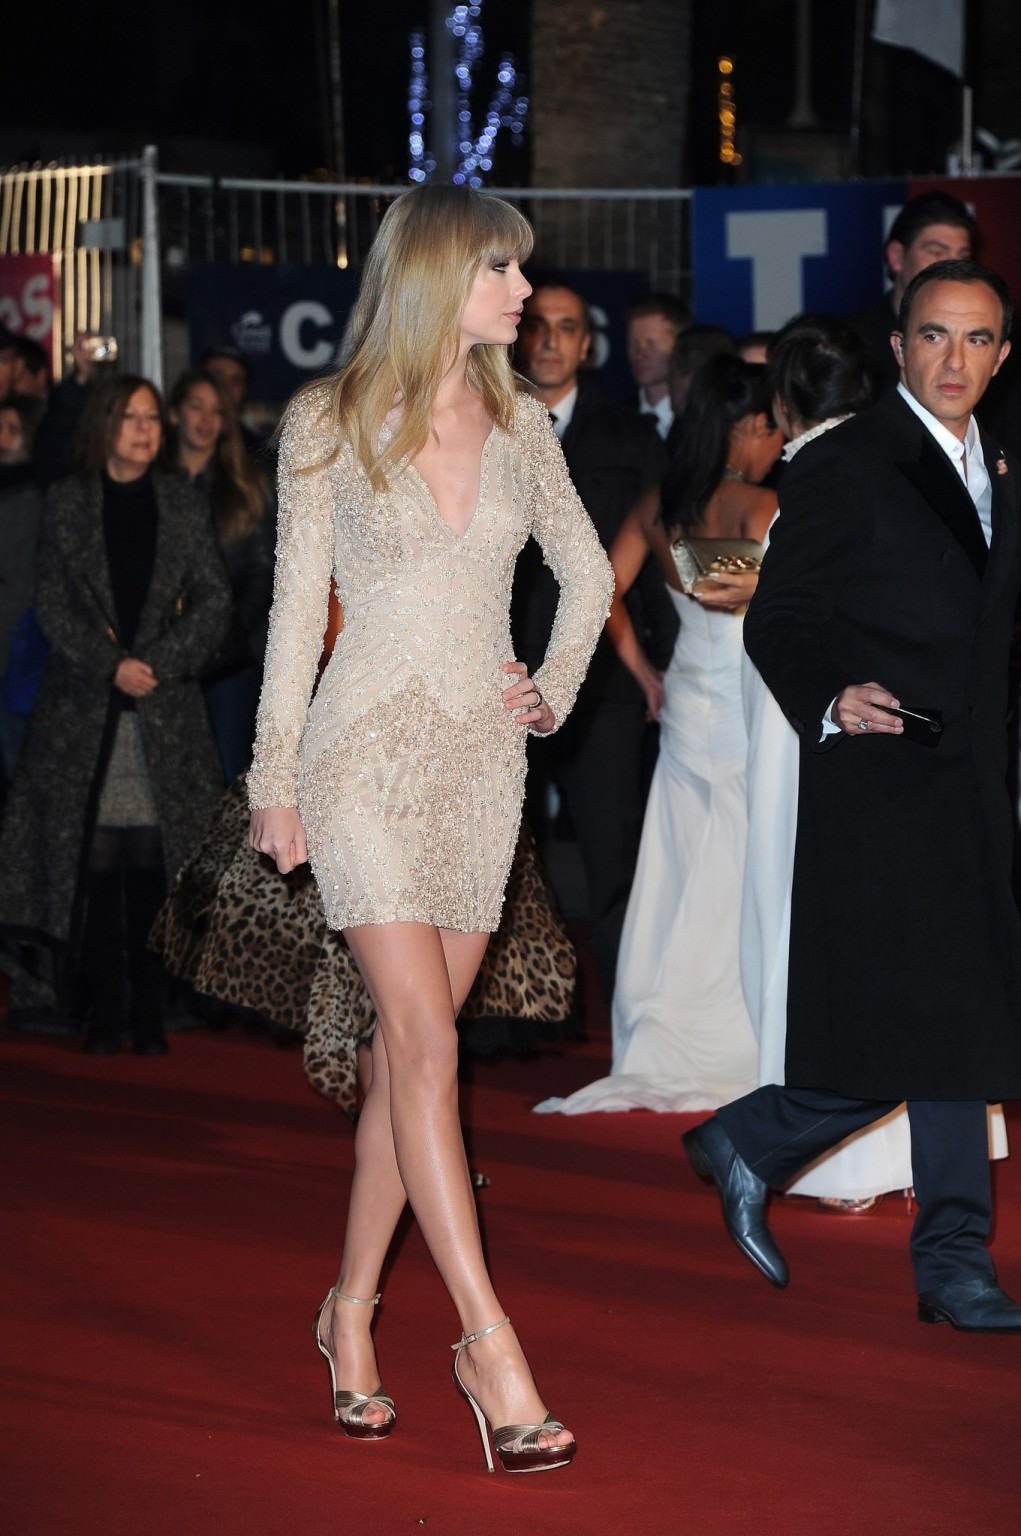 Taylor Swift cleavy and leggy wearing tight mini dress at NRJ Music Awards 2013  #75242689